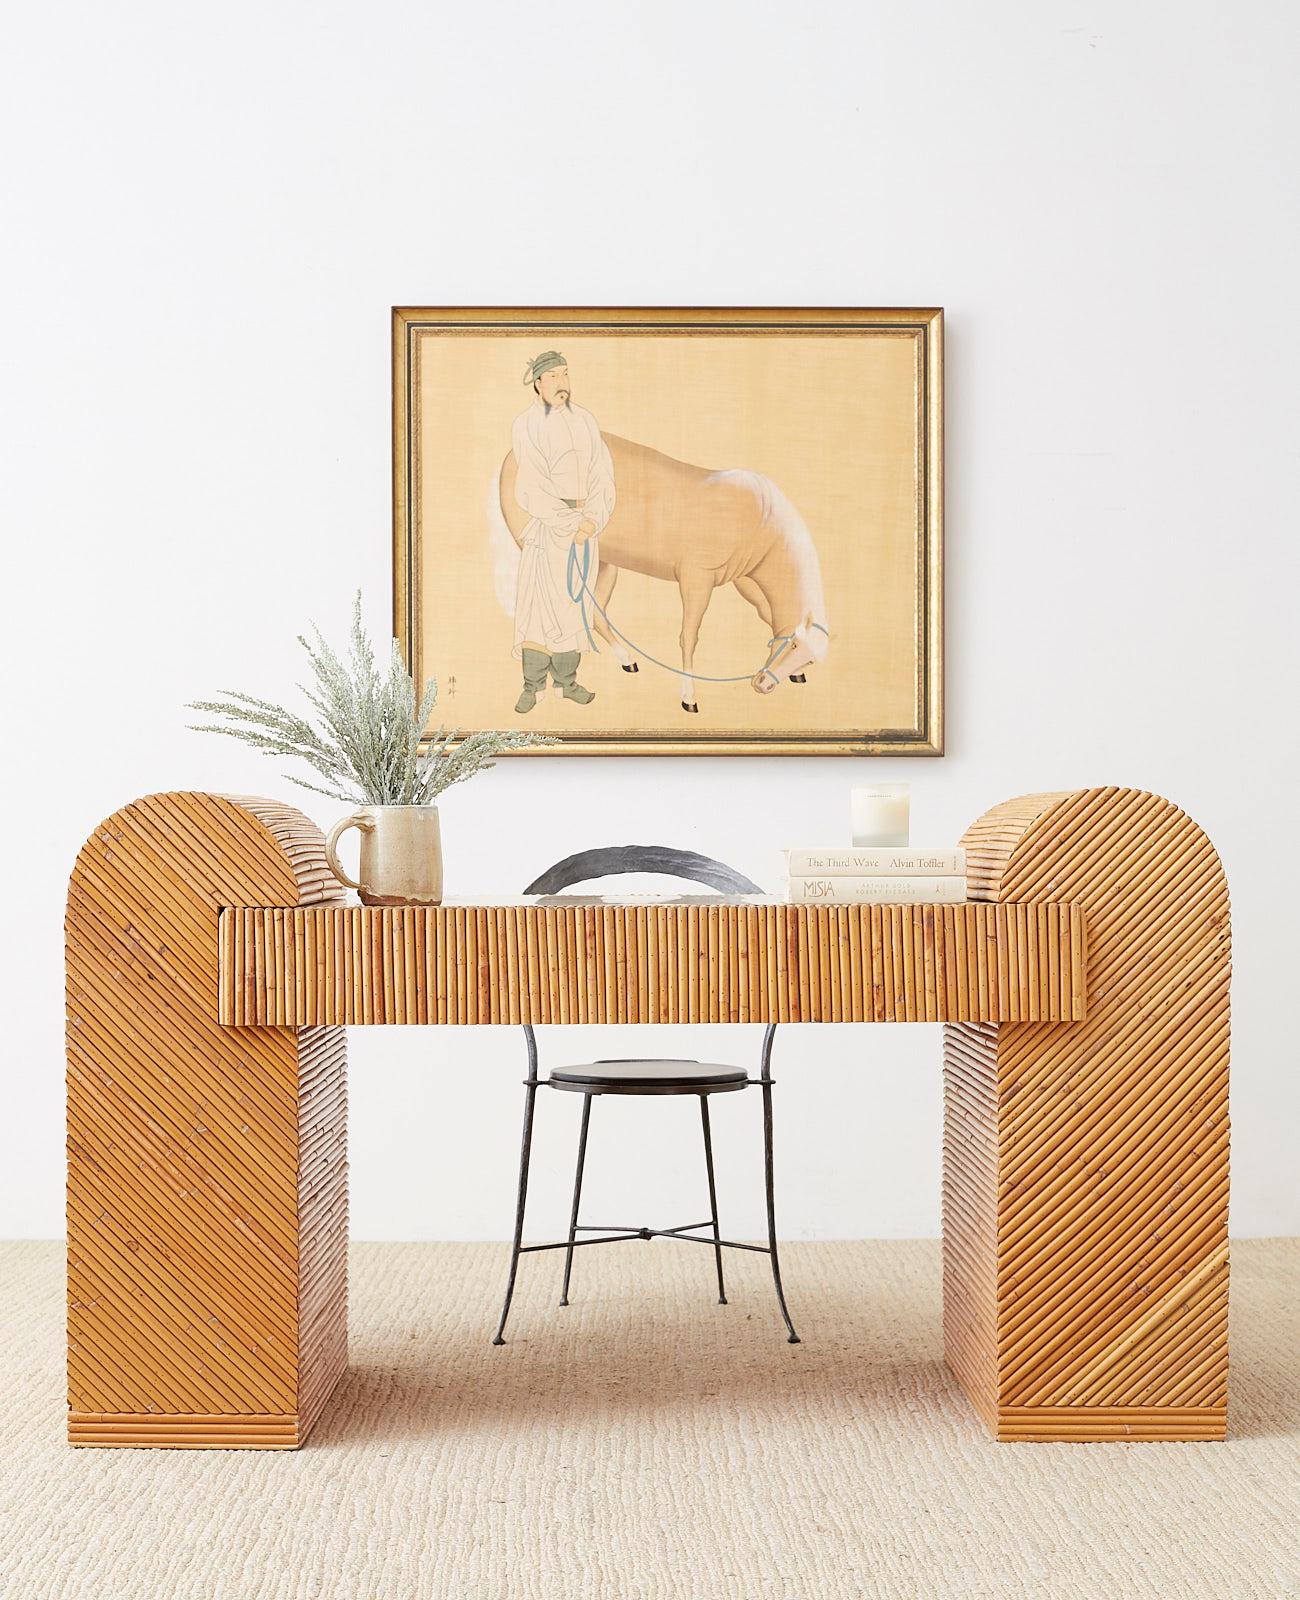 Exceptional Italian Mid-Century Modern three-piece writing table or desk. Constructed from a wooden frame crafted with split reed bamboo rattan. This desk represents everything wonderful about the use of rattan. Incredible geometric patterns abound